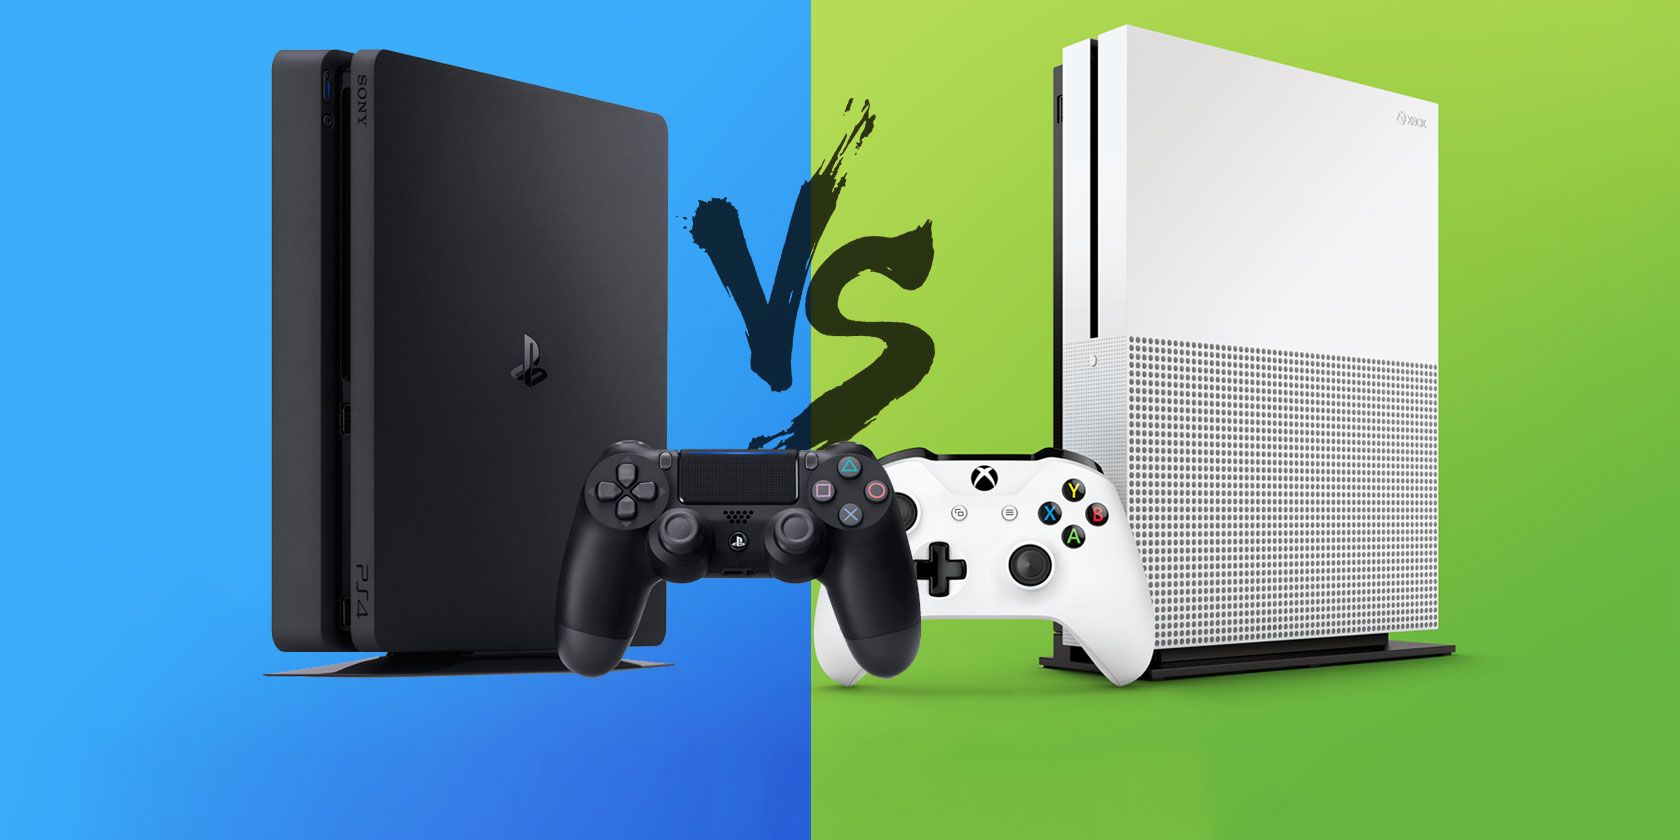 Beangstigend Voorgevoel Verstenen PS4 Slim or Xbox One S: The One Question Casual Gamers Should Ask